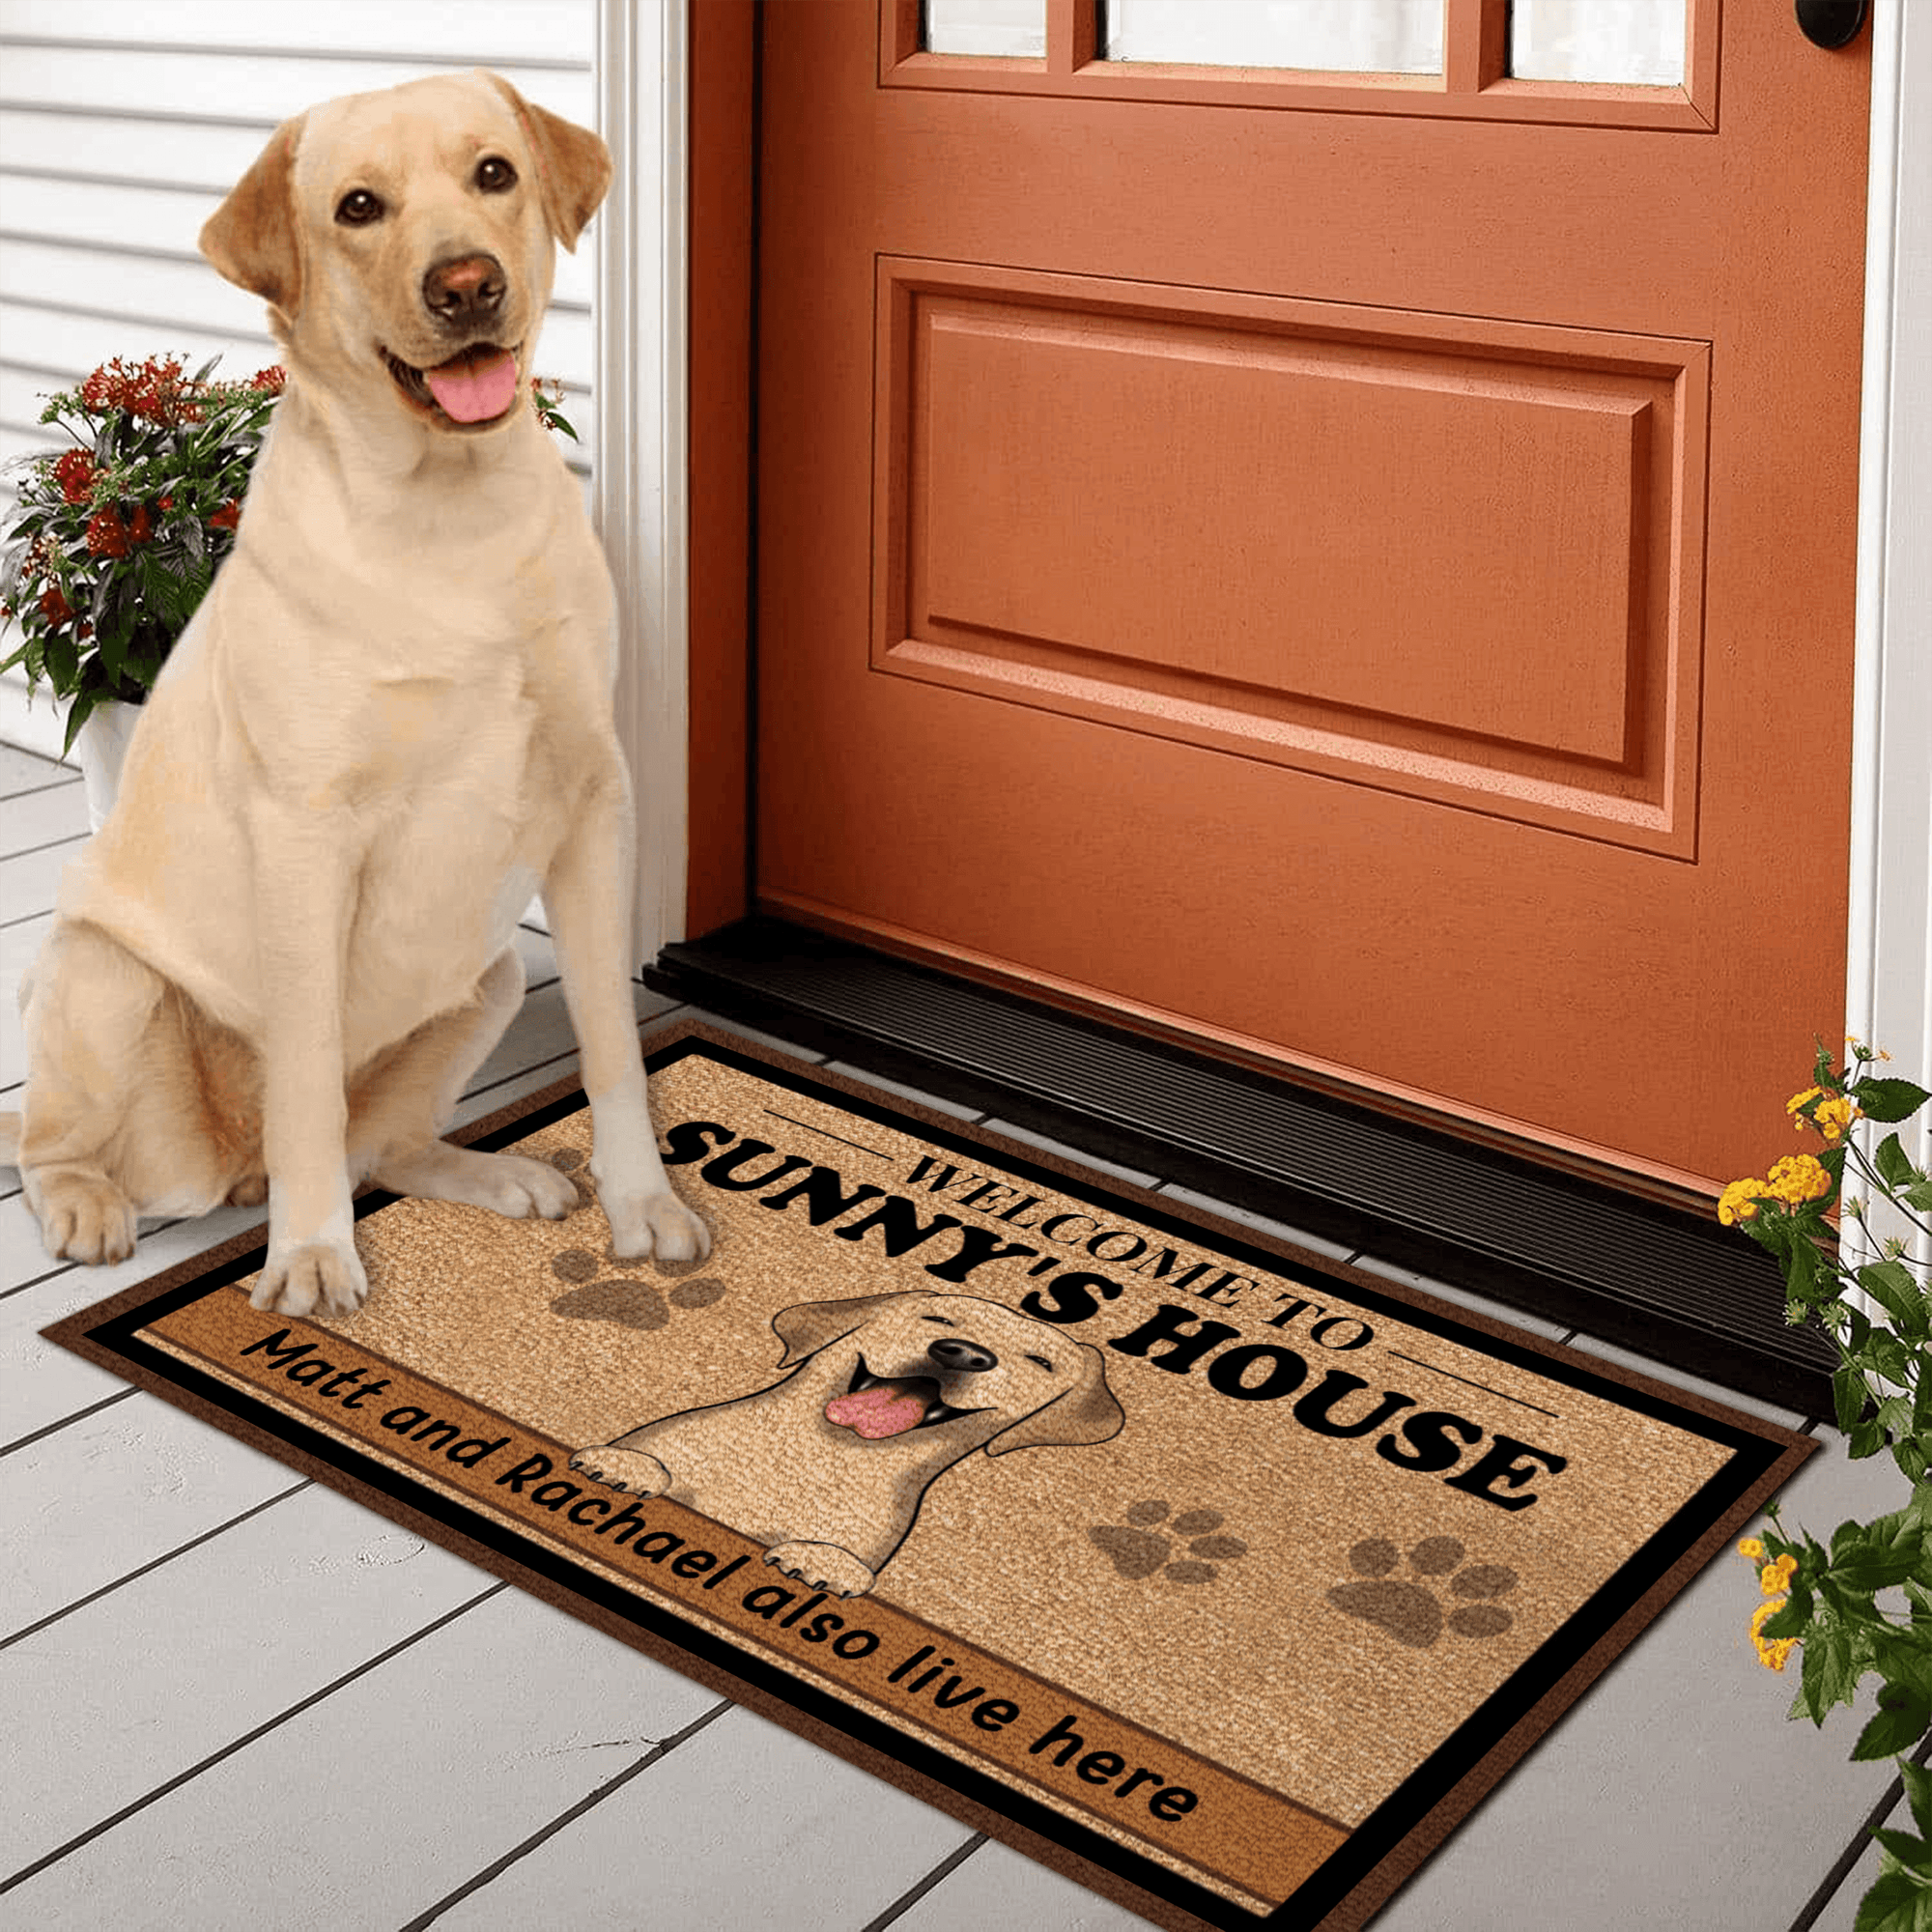 Welcome to Dog's House, the Humans live here too! - Personalized Doormat - Birthday, Housewarming, Funny Gift for Homeowners, Friends, Dog Mom, Dog Dad, Dog Lovers, Pet Gifts for Him, Her - Suzitee Store